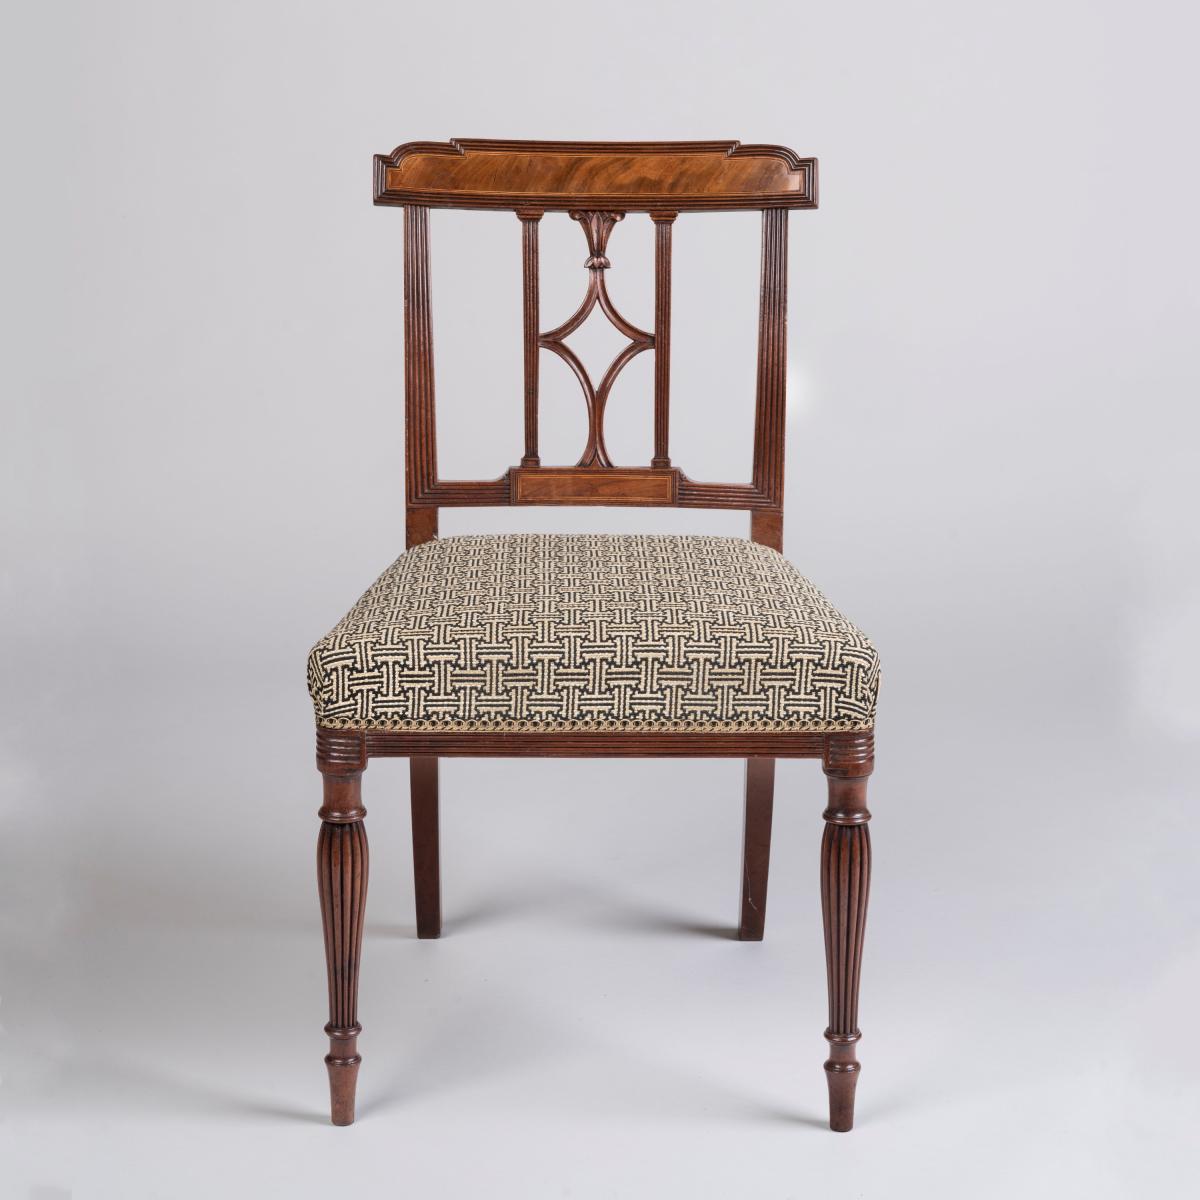 A Fine Set of Twelve George III Period Mahogany Dining Chairs